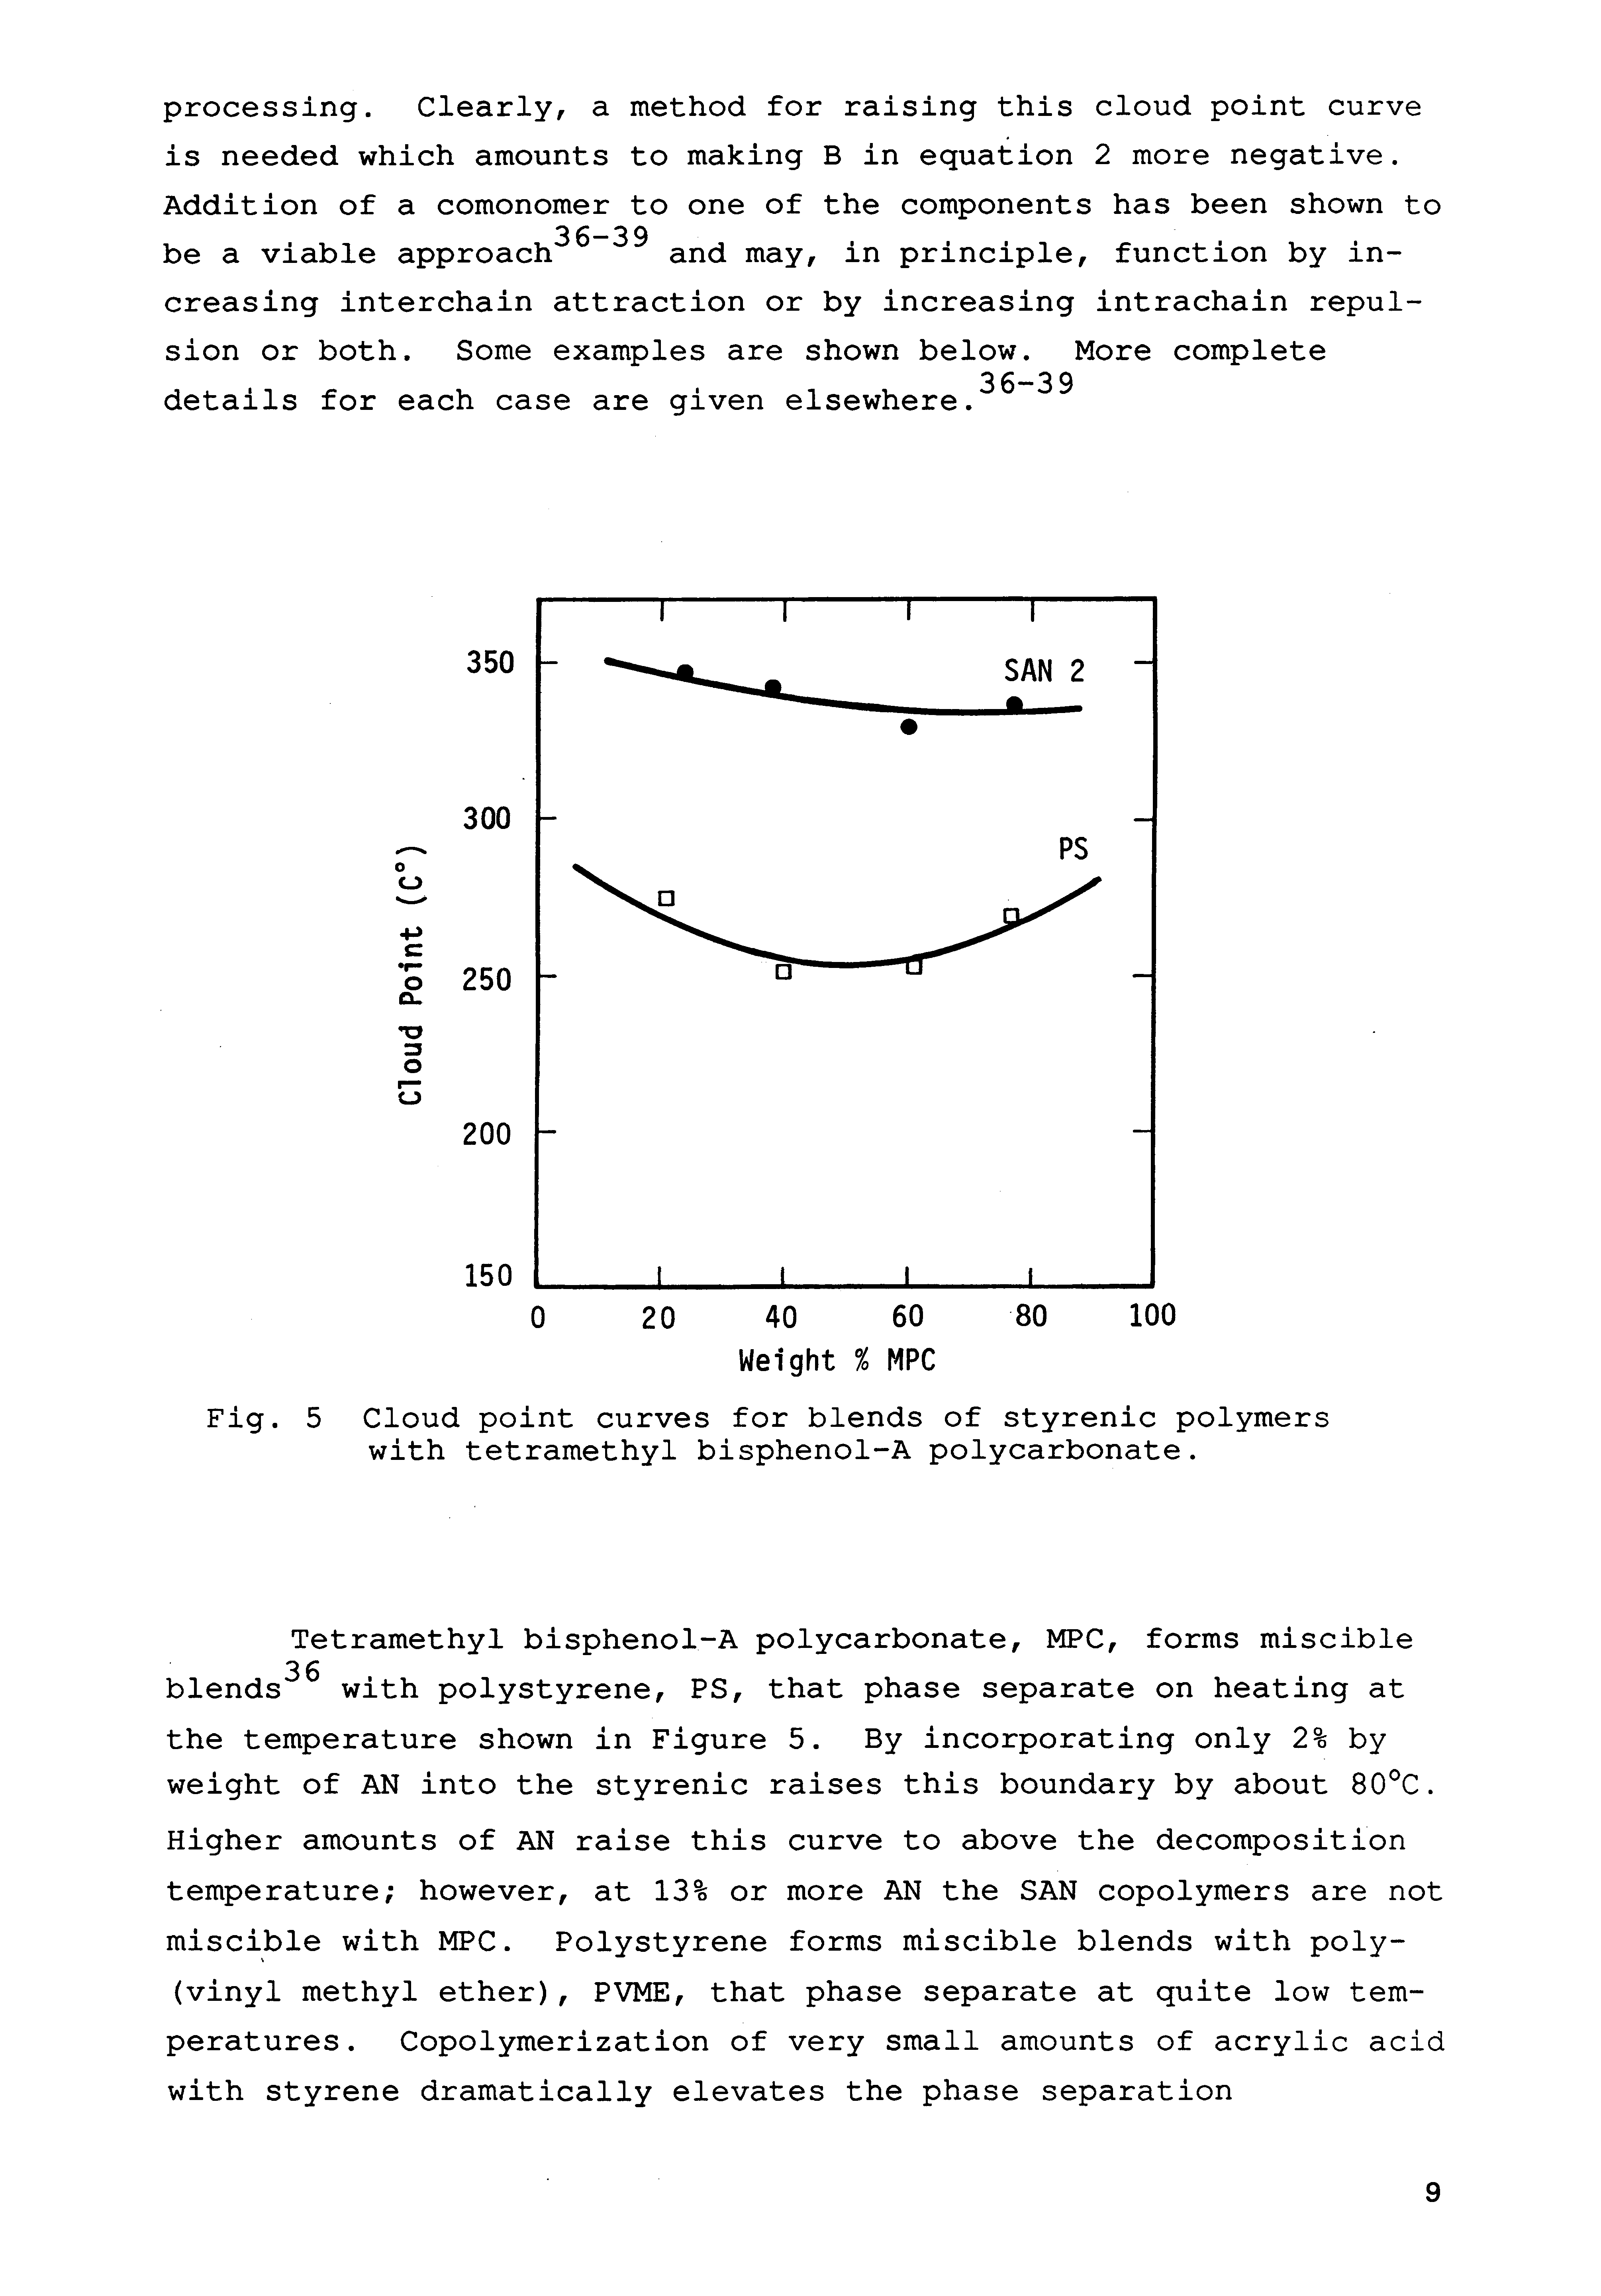 Fig. 5 Cloud point curves for blends of styrenic polymers with tetramethyl bisphenol-A polycarbonate.